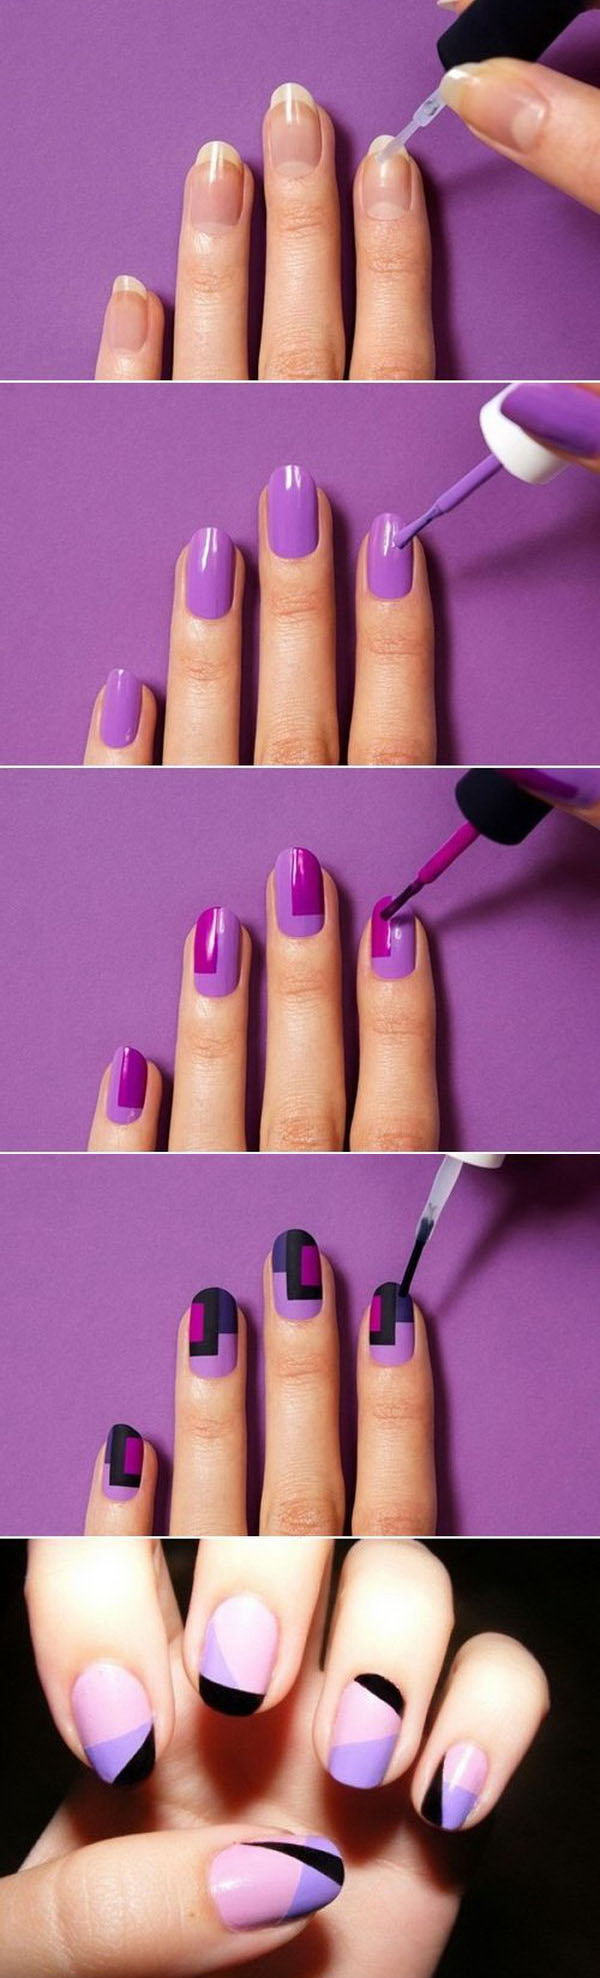 20+ Easy and Fun Step by Step Nail Art Tutorials - Noted List